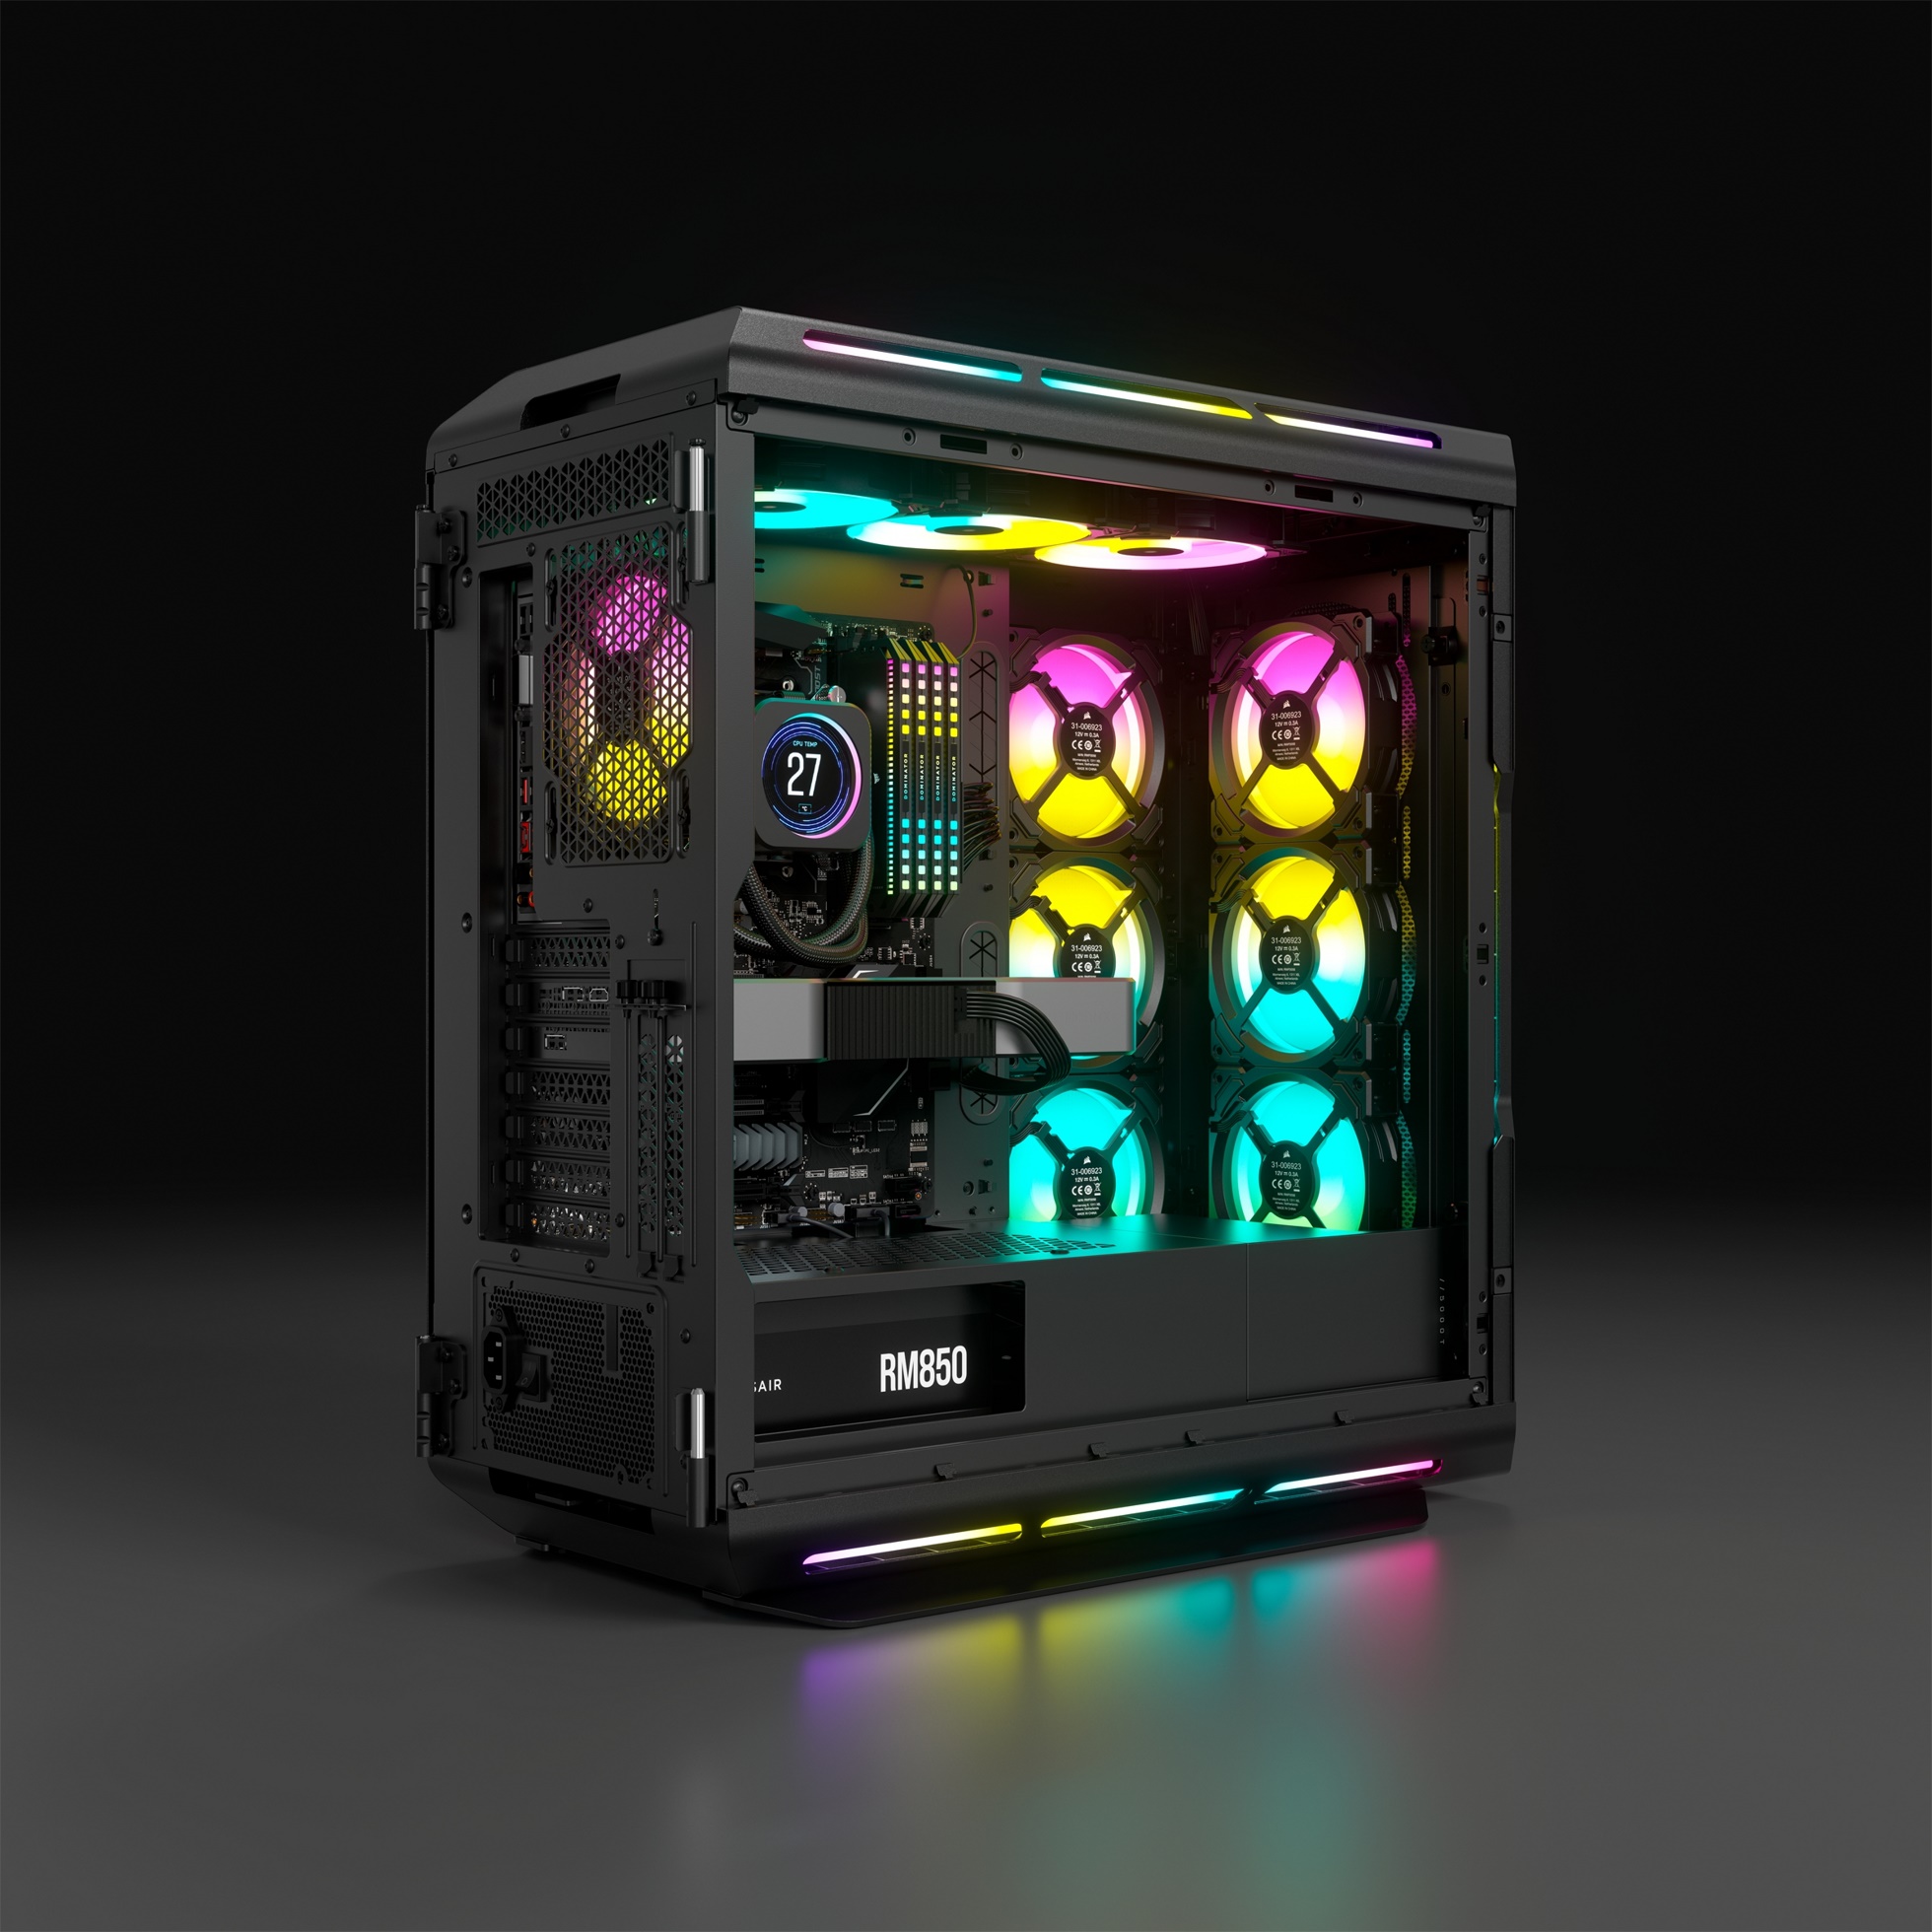 CORSAIR iCUE 5000T RGB mid-tower | case review - high-end with RGB absolute igor´sLAB in overkill